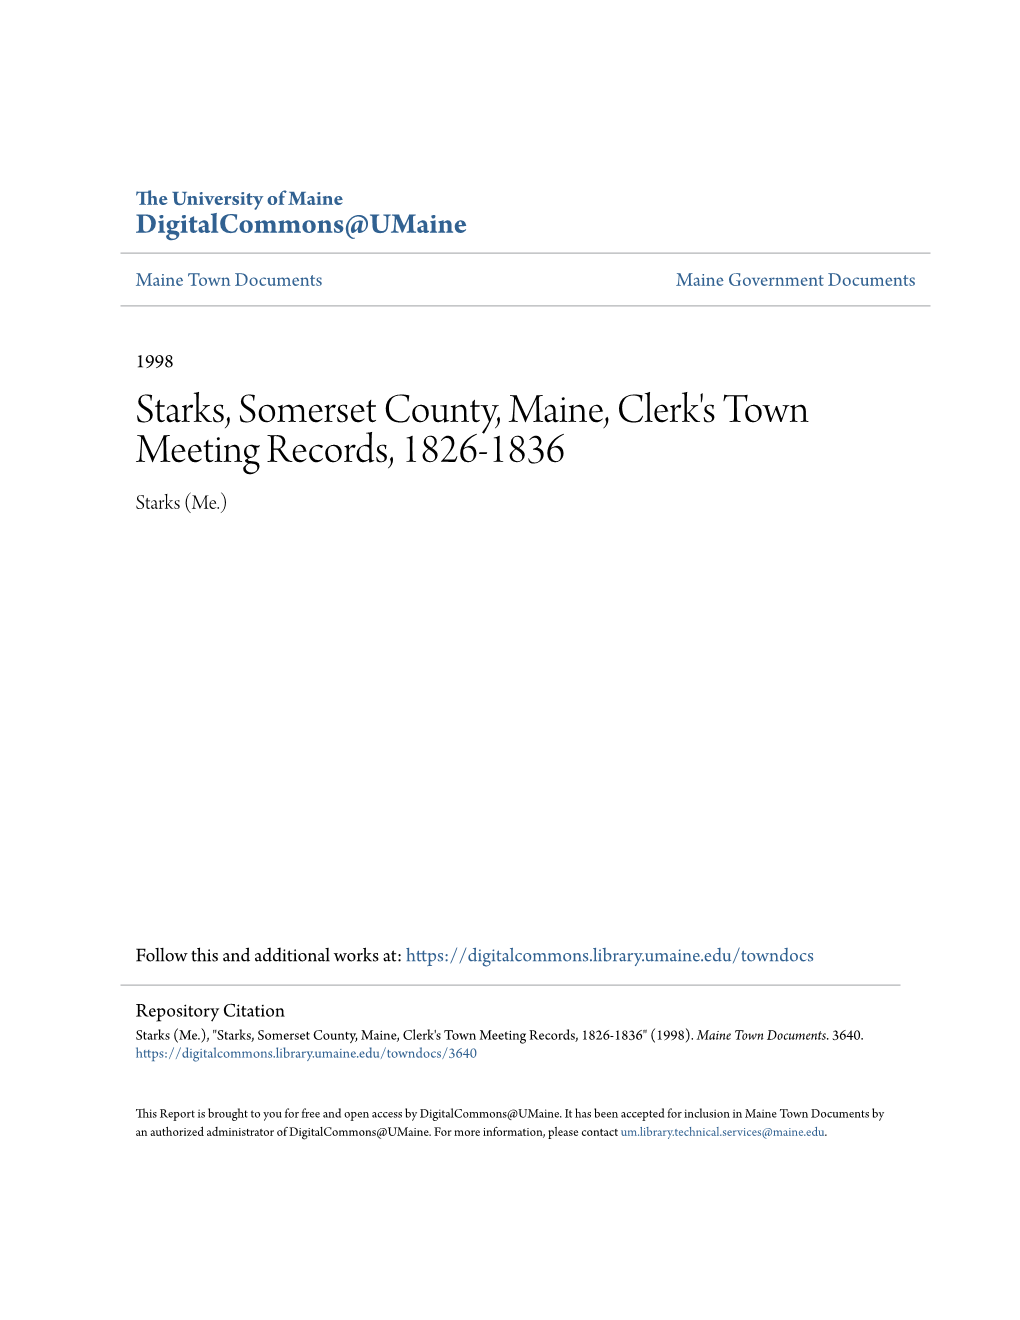 Starks, Somerset County, Maine, Clerk's Town Meeting Records, 1826-1836 Starks (Me.)